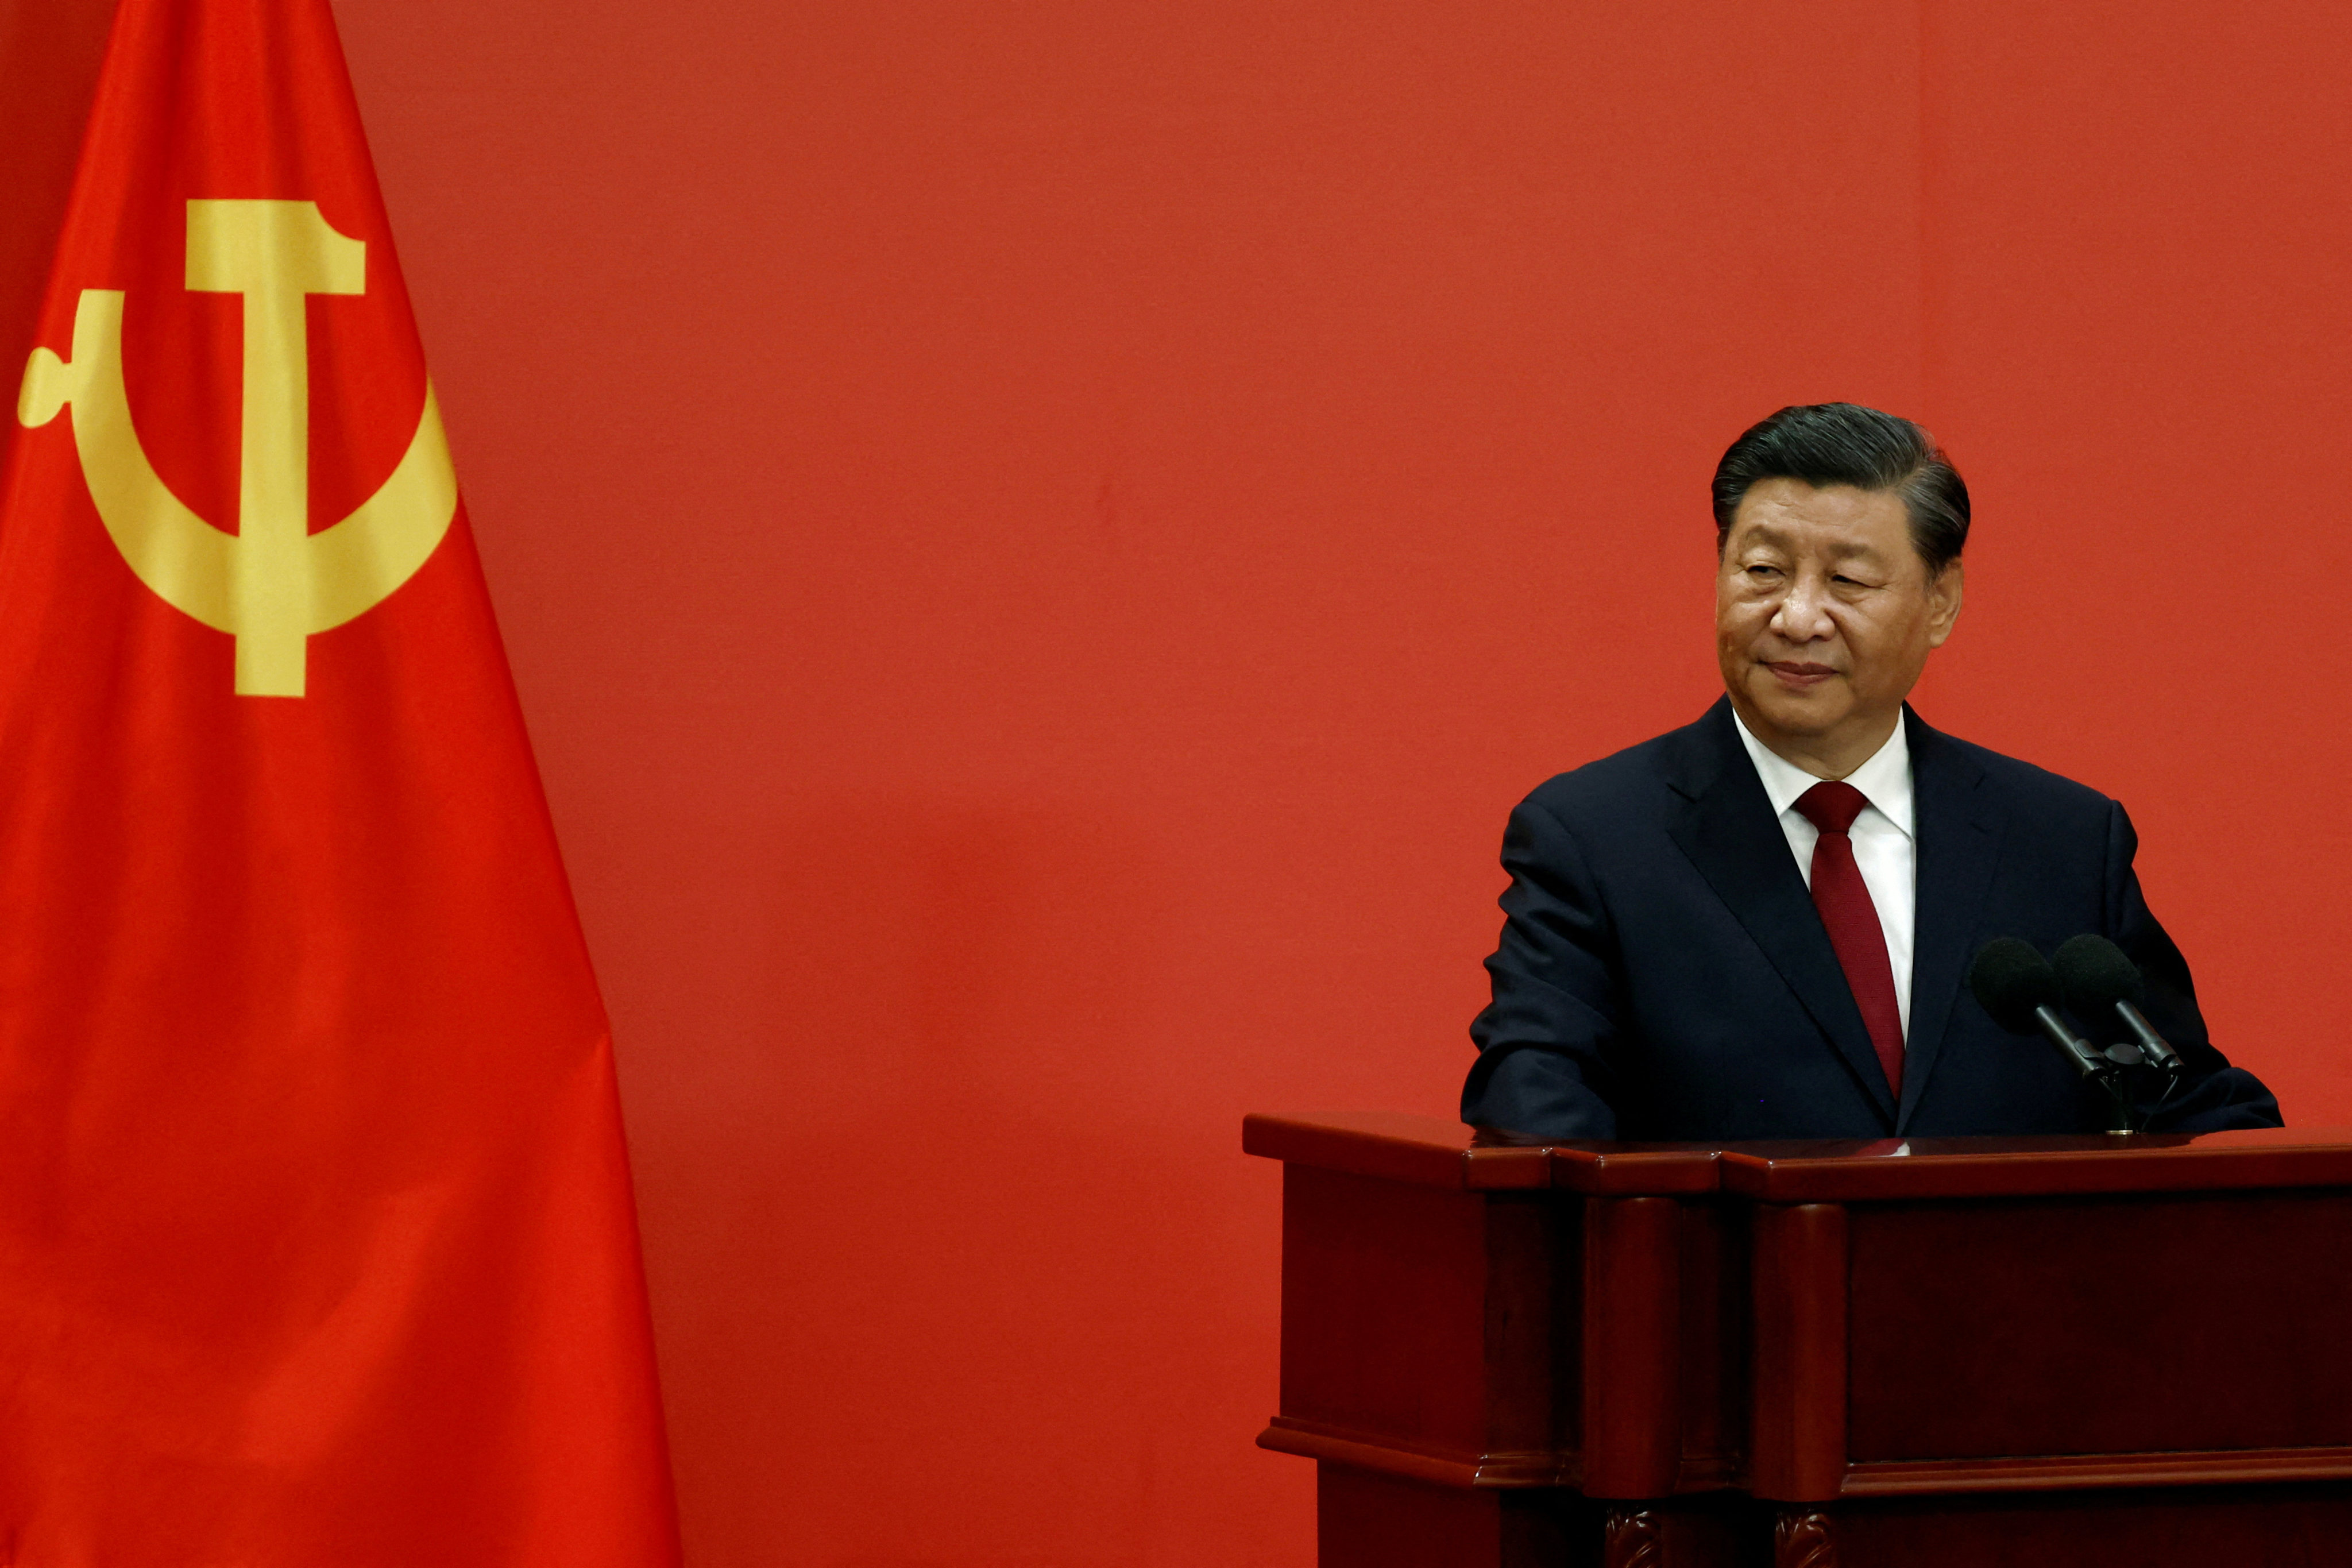 President Xi Jinping meets the media following the 20th party congress in Beijing on October 23. Photo: Reuters